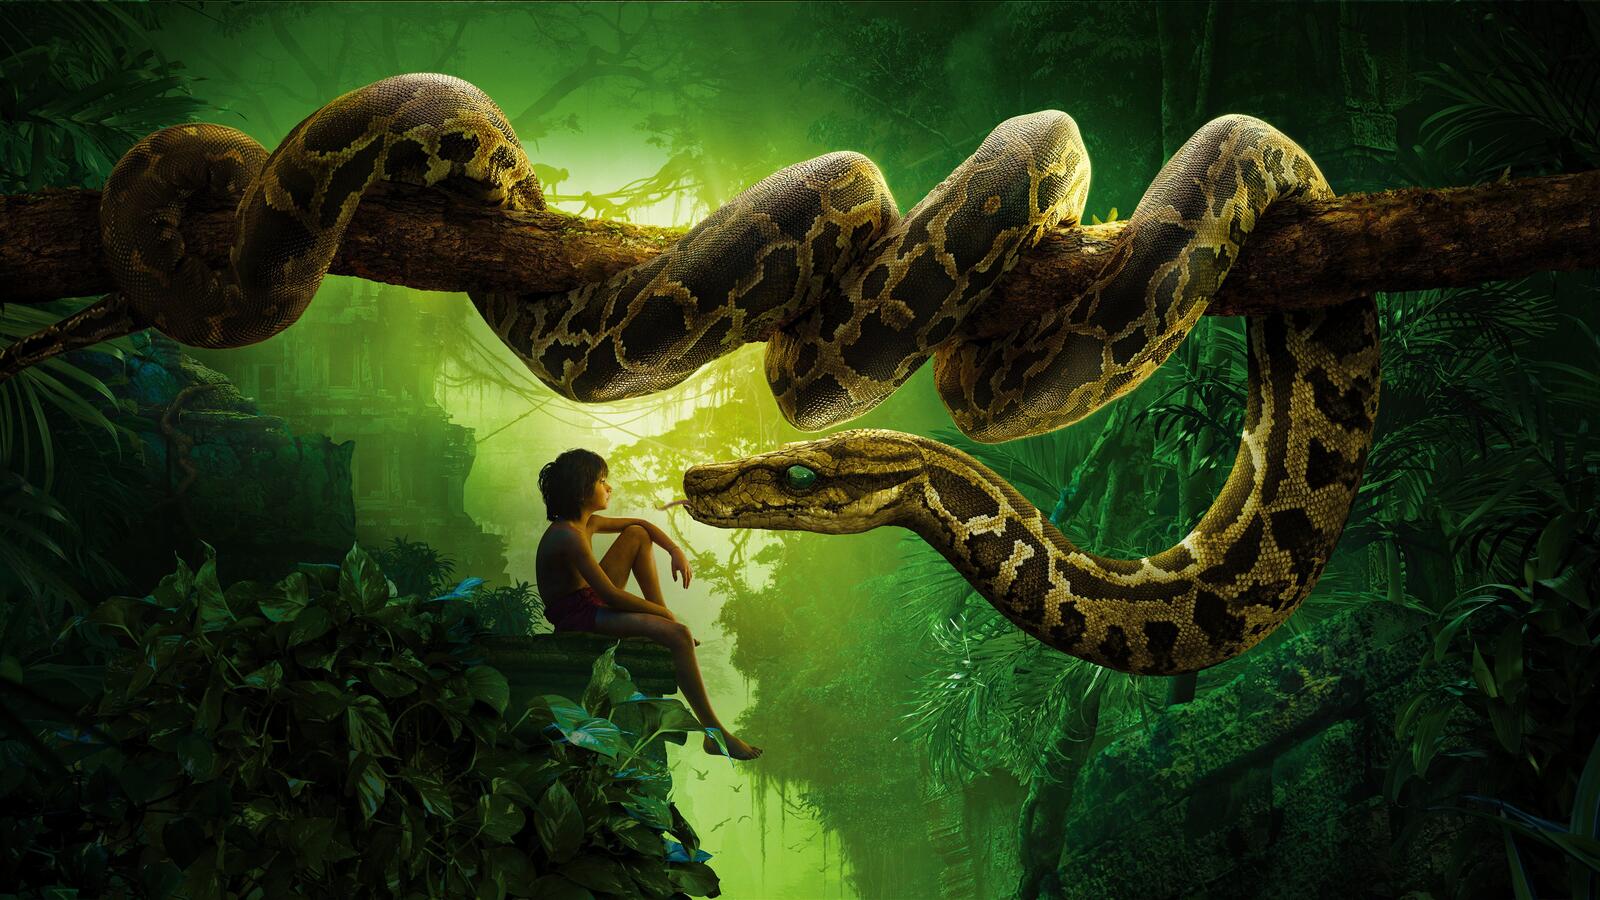 Free photo Mowgli in the Jungle with a Big Snake